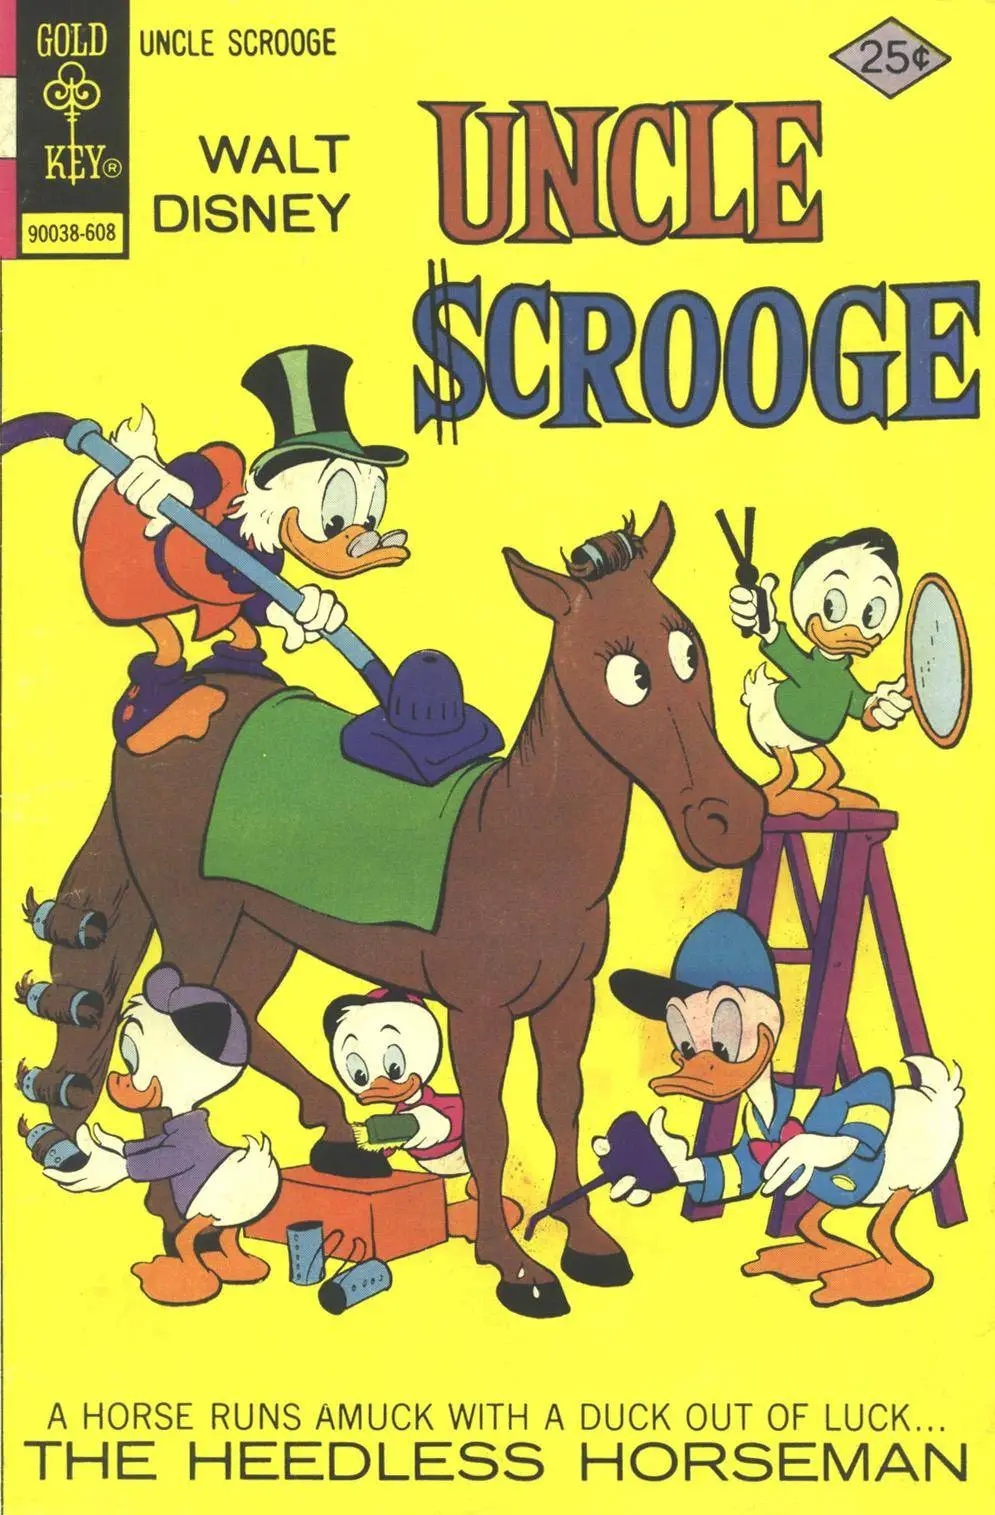 For blasty and symm - Uncle Scrooge 131 cbr